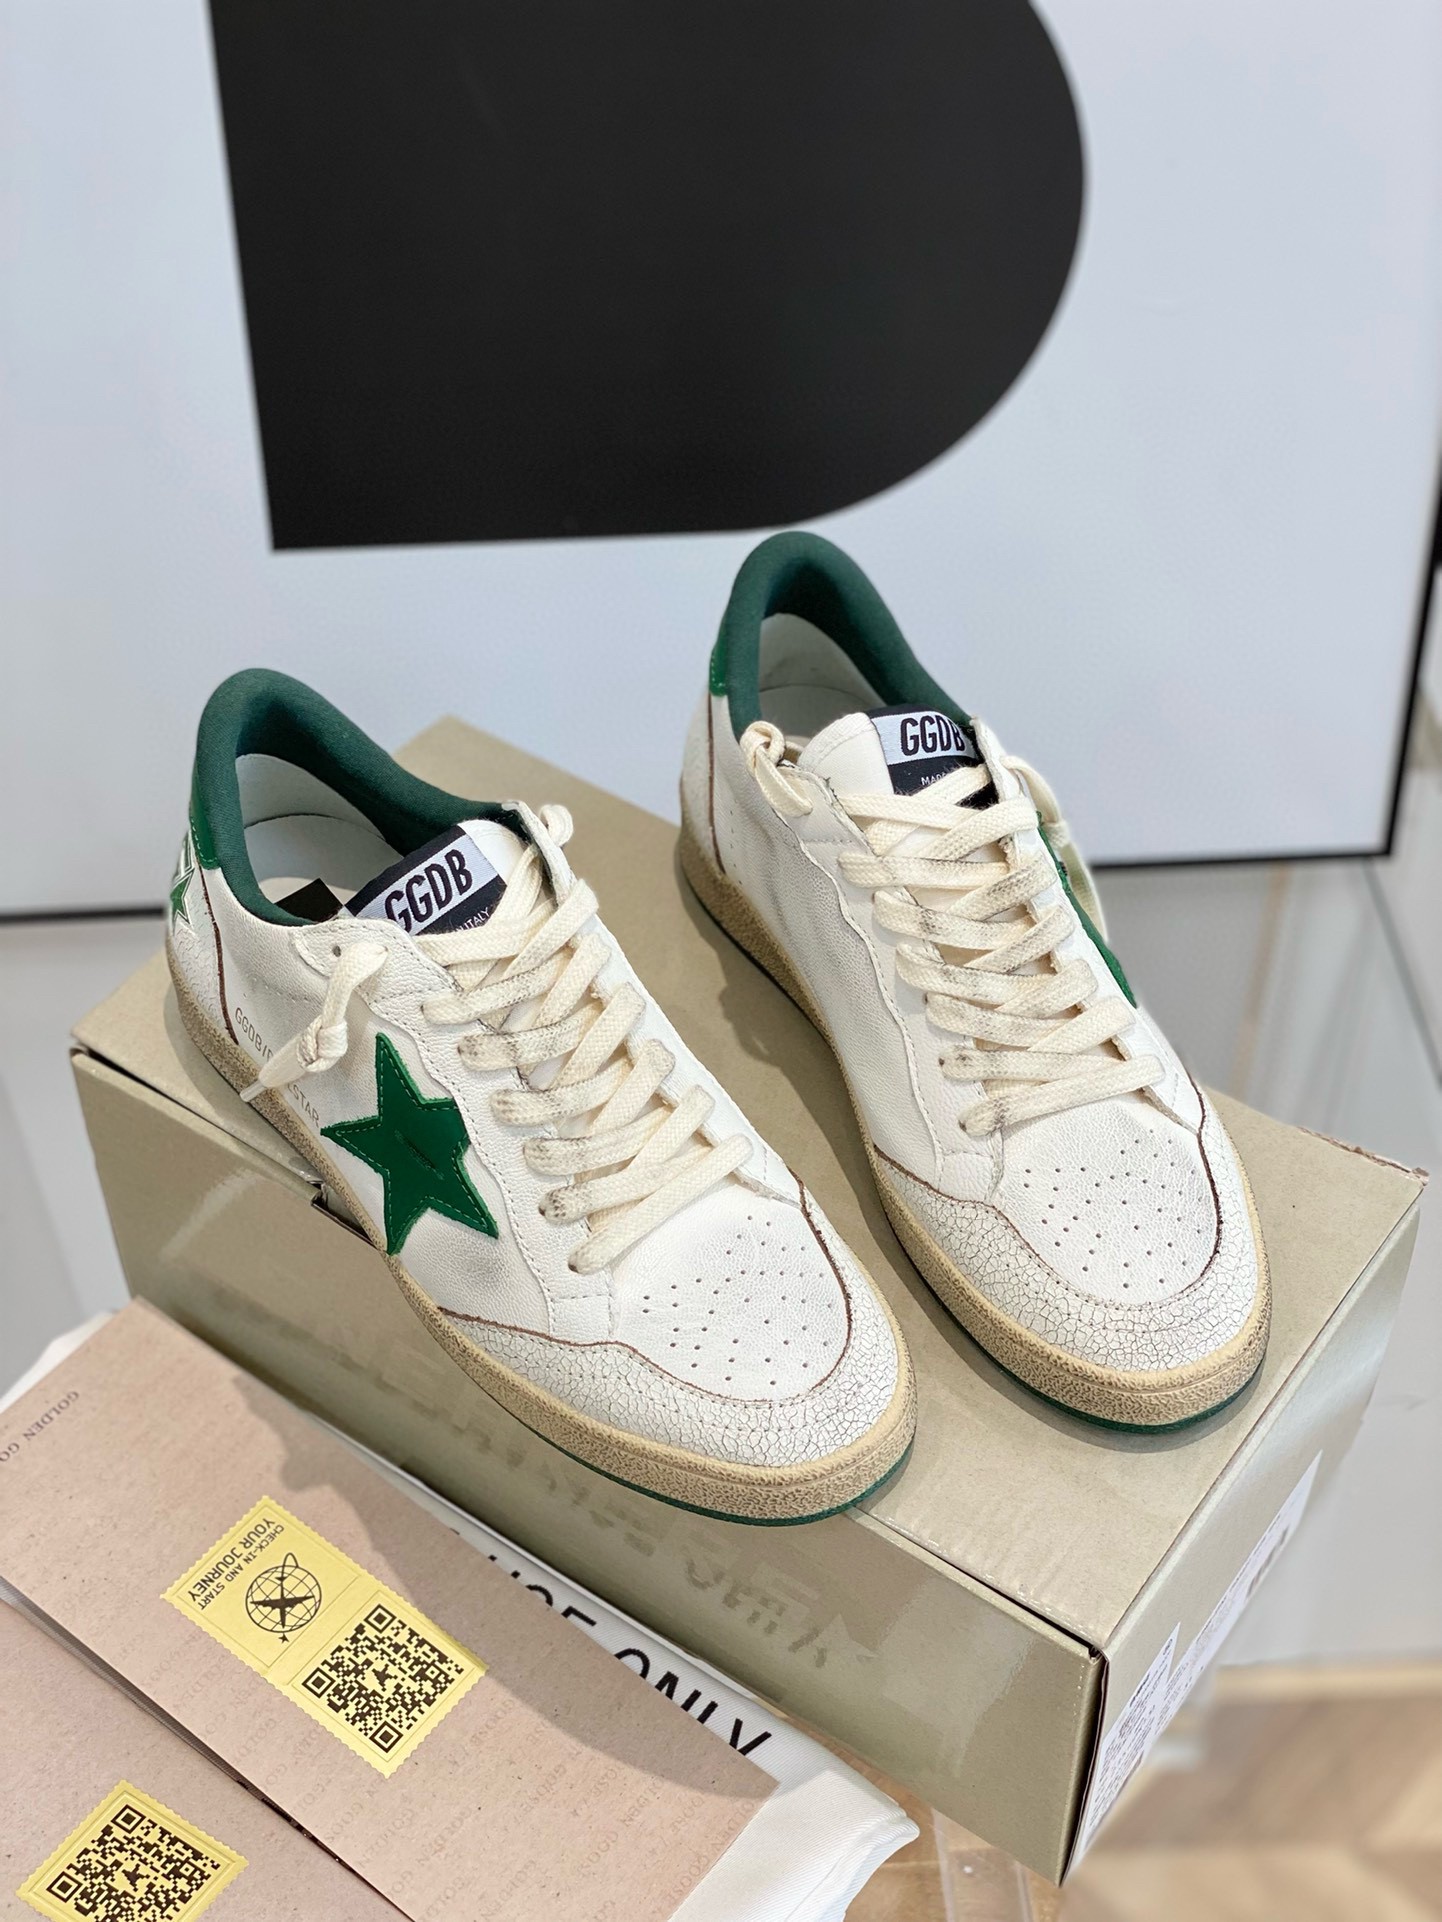 Replica Golden Goose Women's Ball Star Sabots with Green Star and Heel Tab